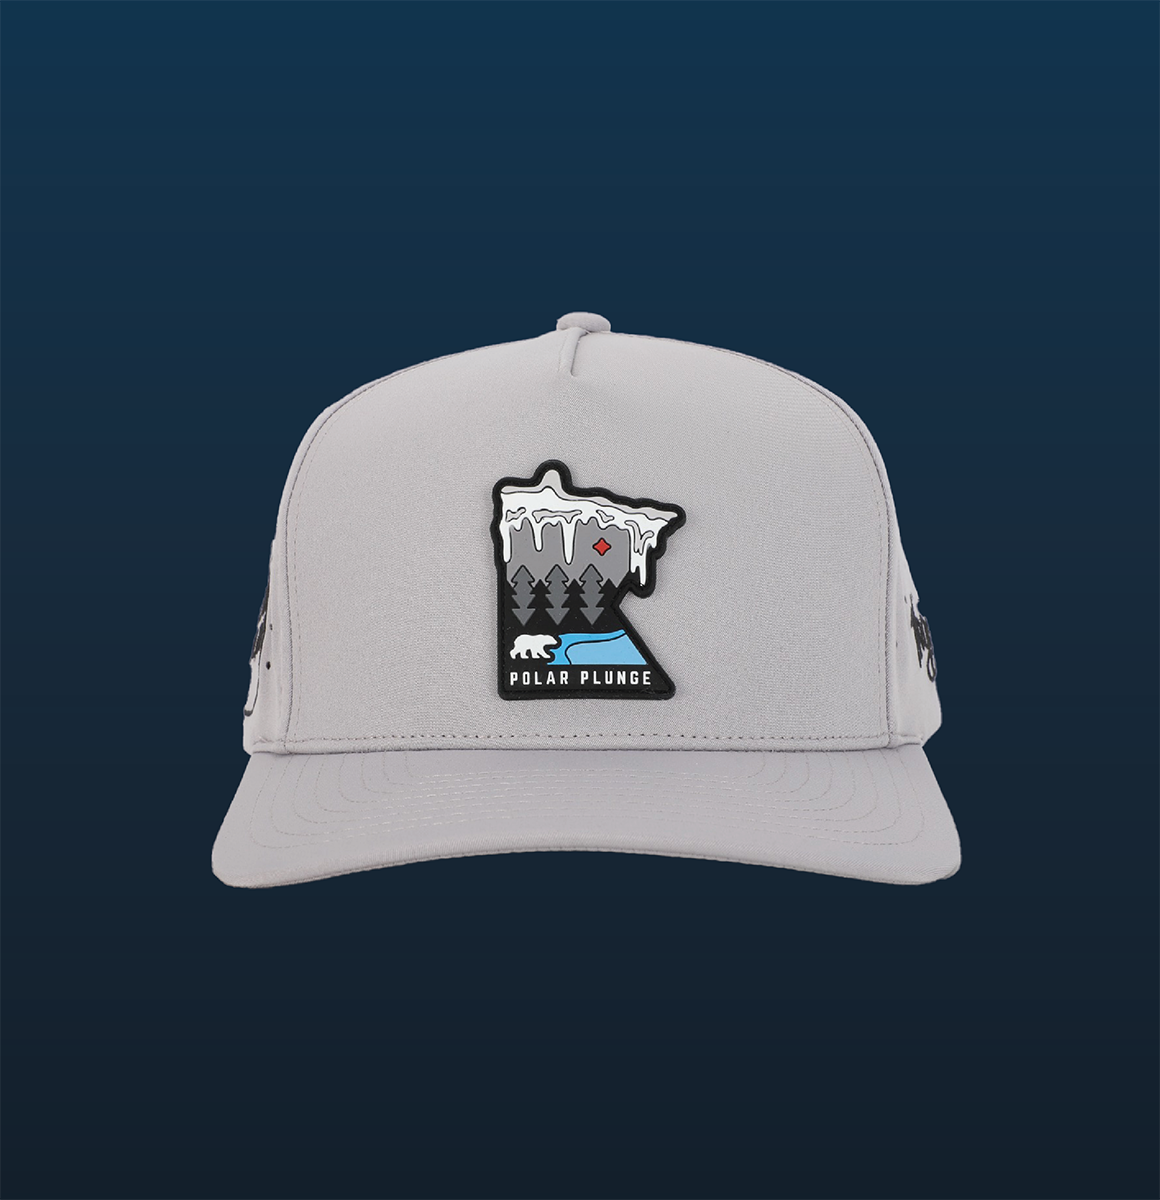 Grey snapback hat with an image of Minnesota and the words Polar Plunge on it